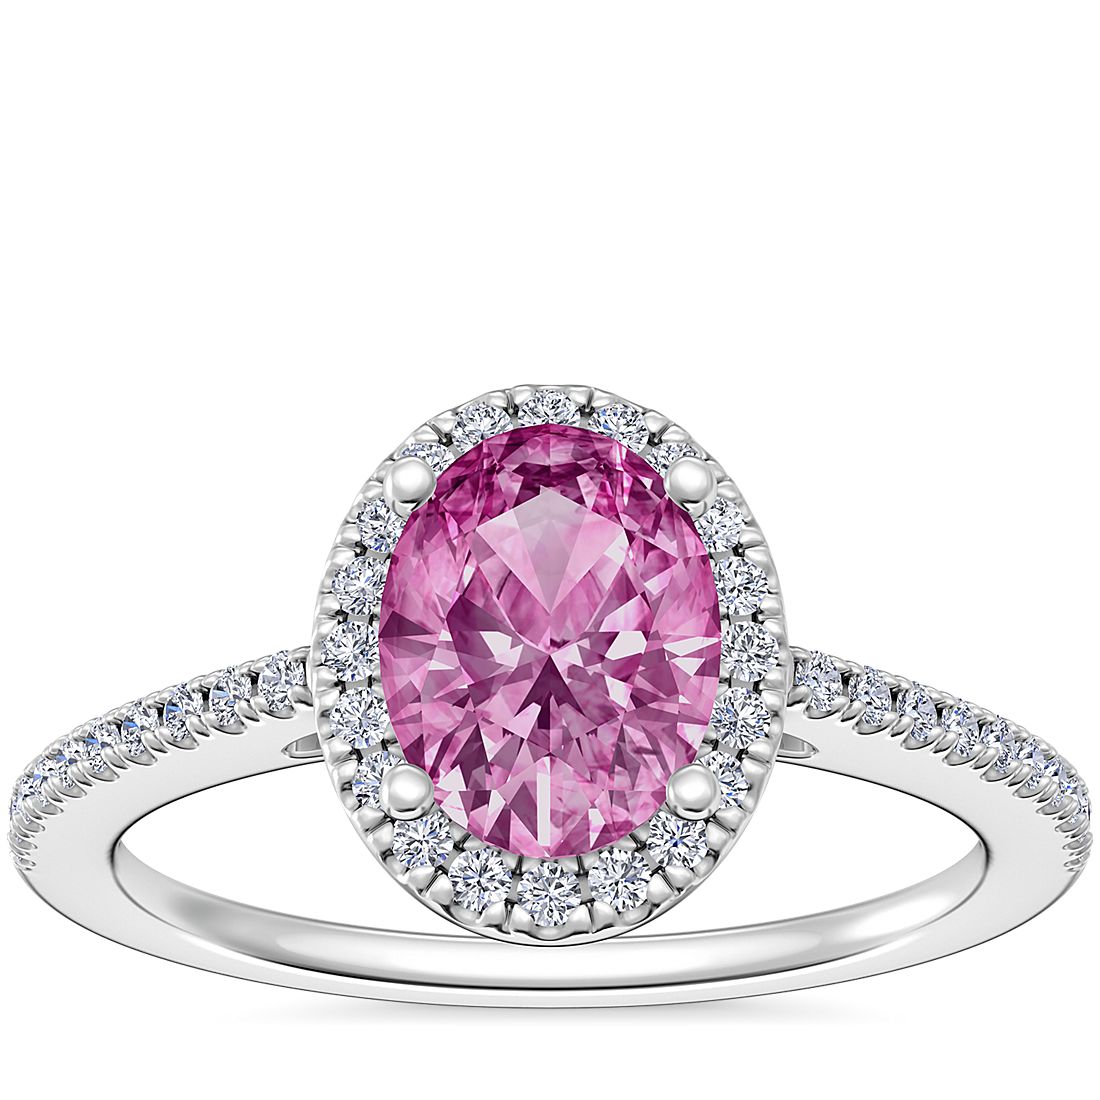 Classic Halo Diamond Engagement Ring with Oval Pink Sapphire in Platinum (8x6mm)